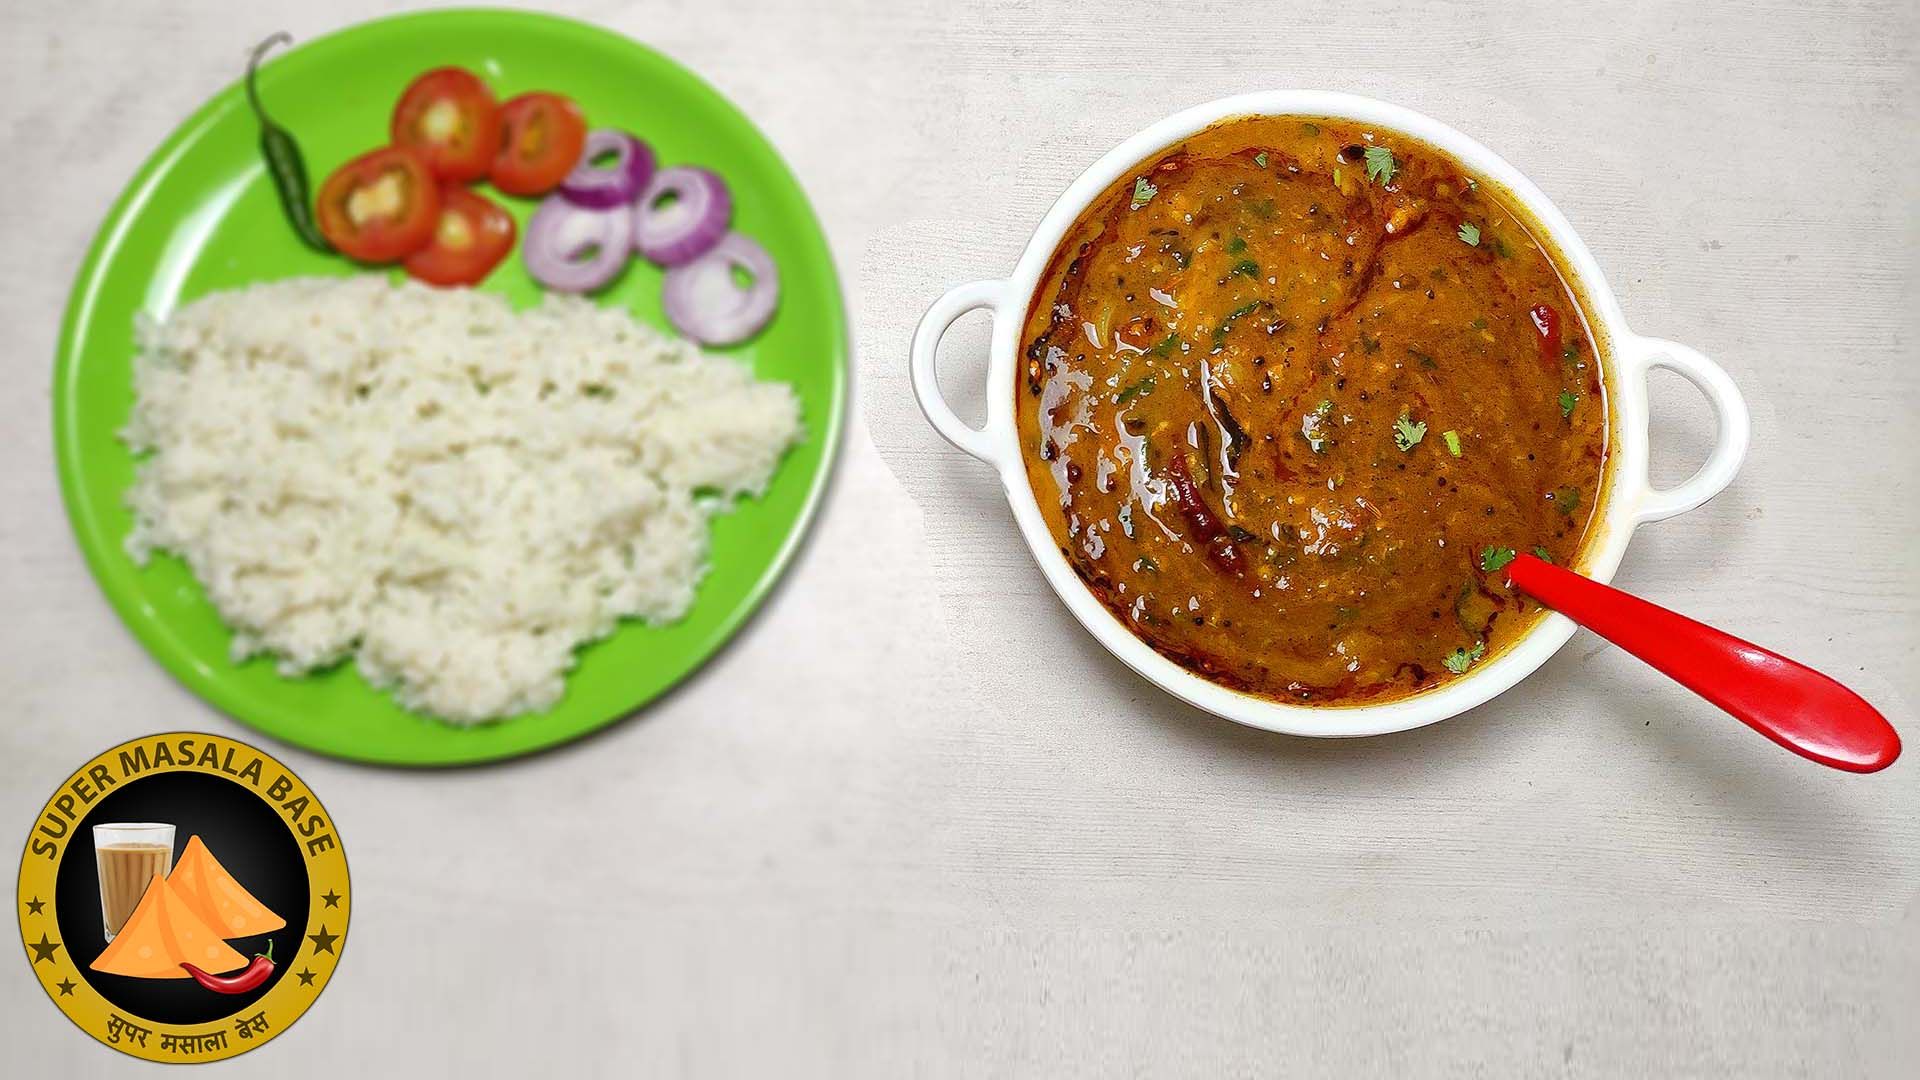 mix dal tadka spicy indian gravy made of multiple pulses tempered with whole spices